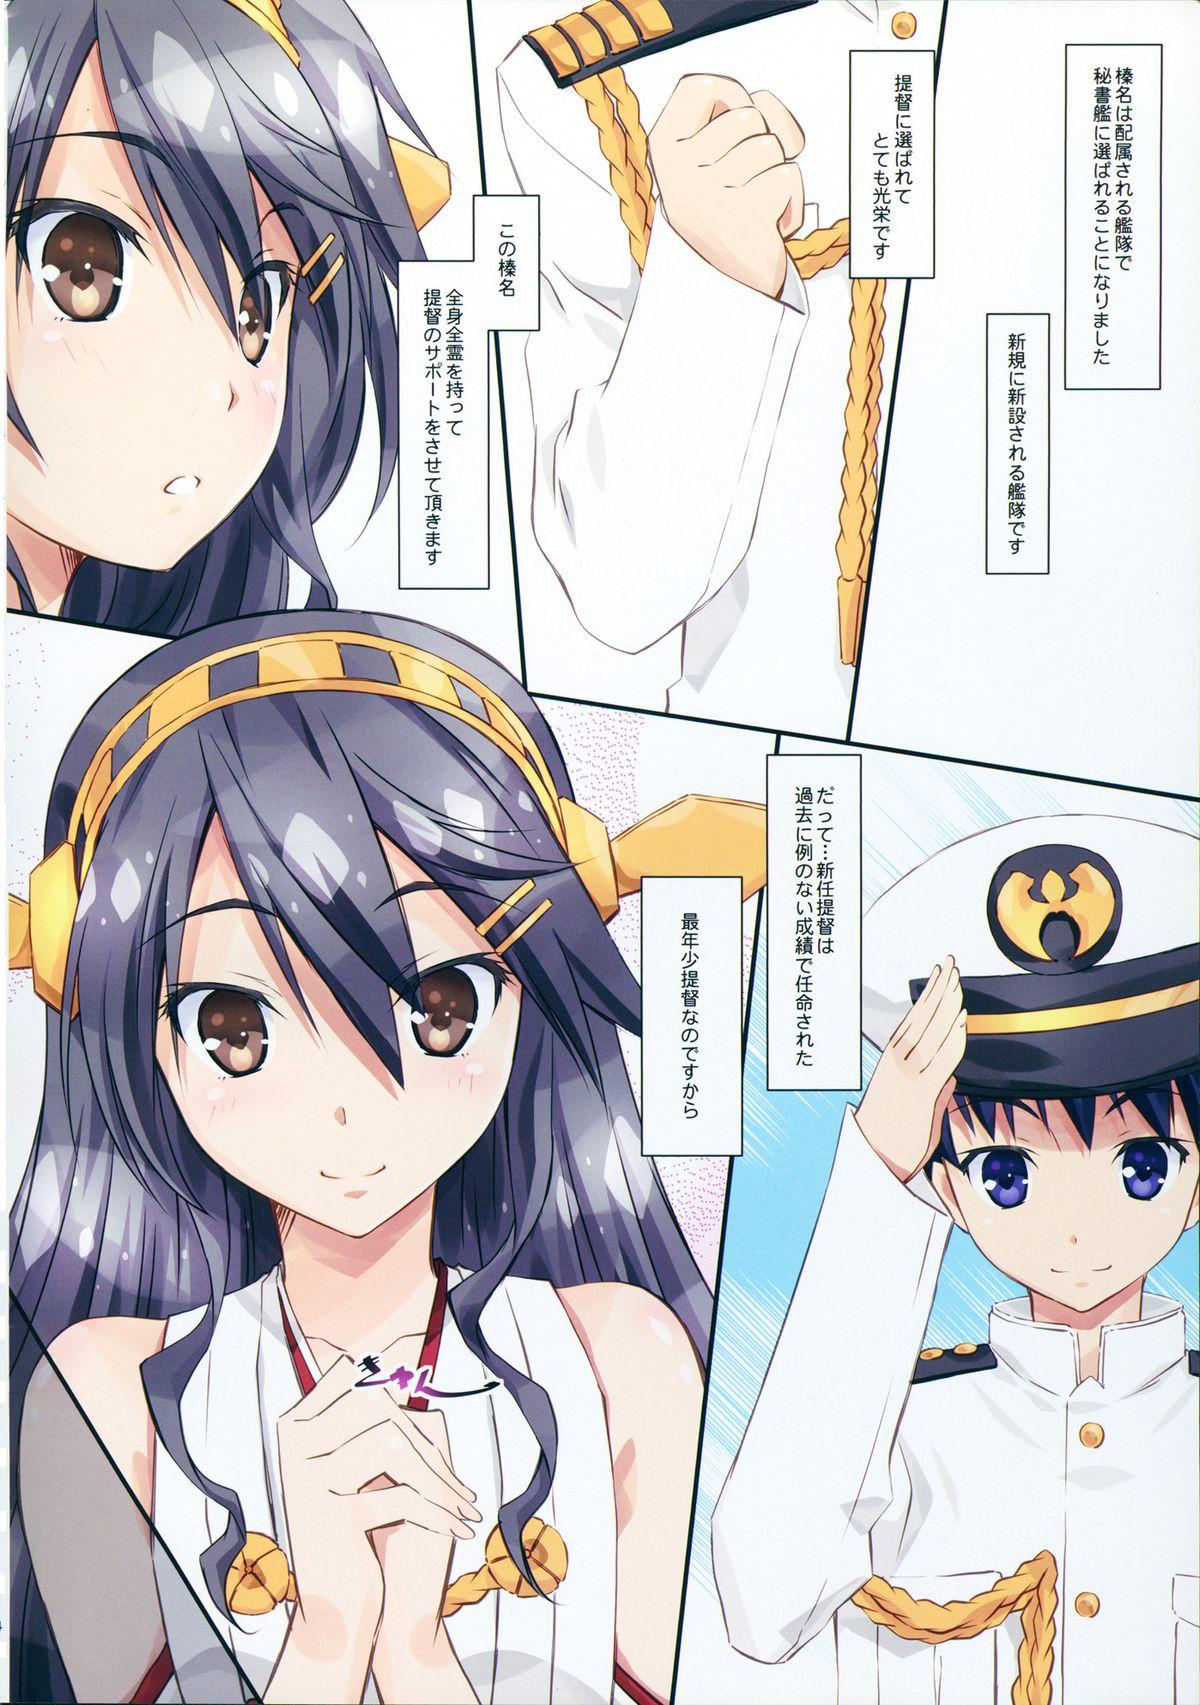 Fucking Haruna to Issho - Kantai collection Reverse - Page 4